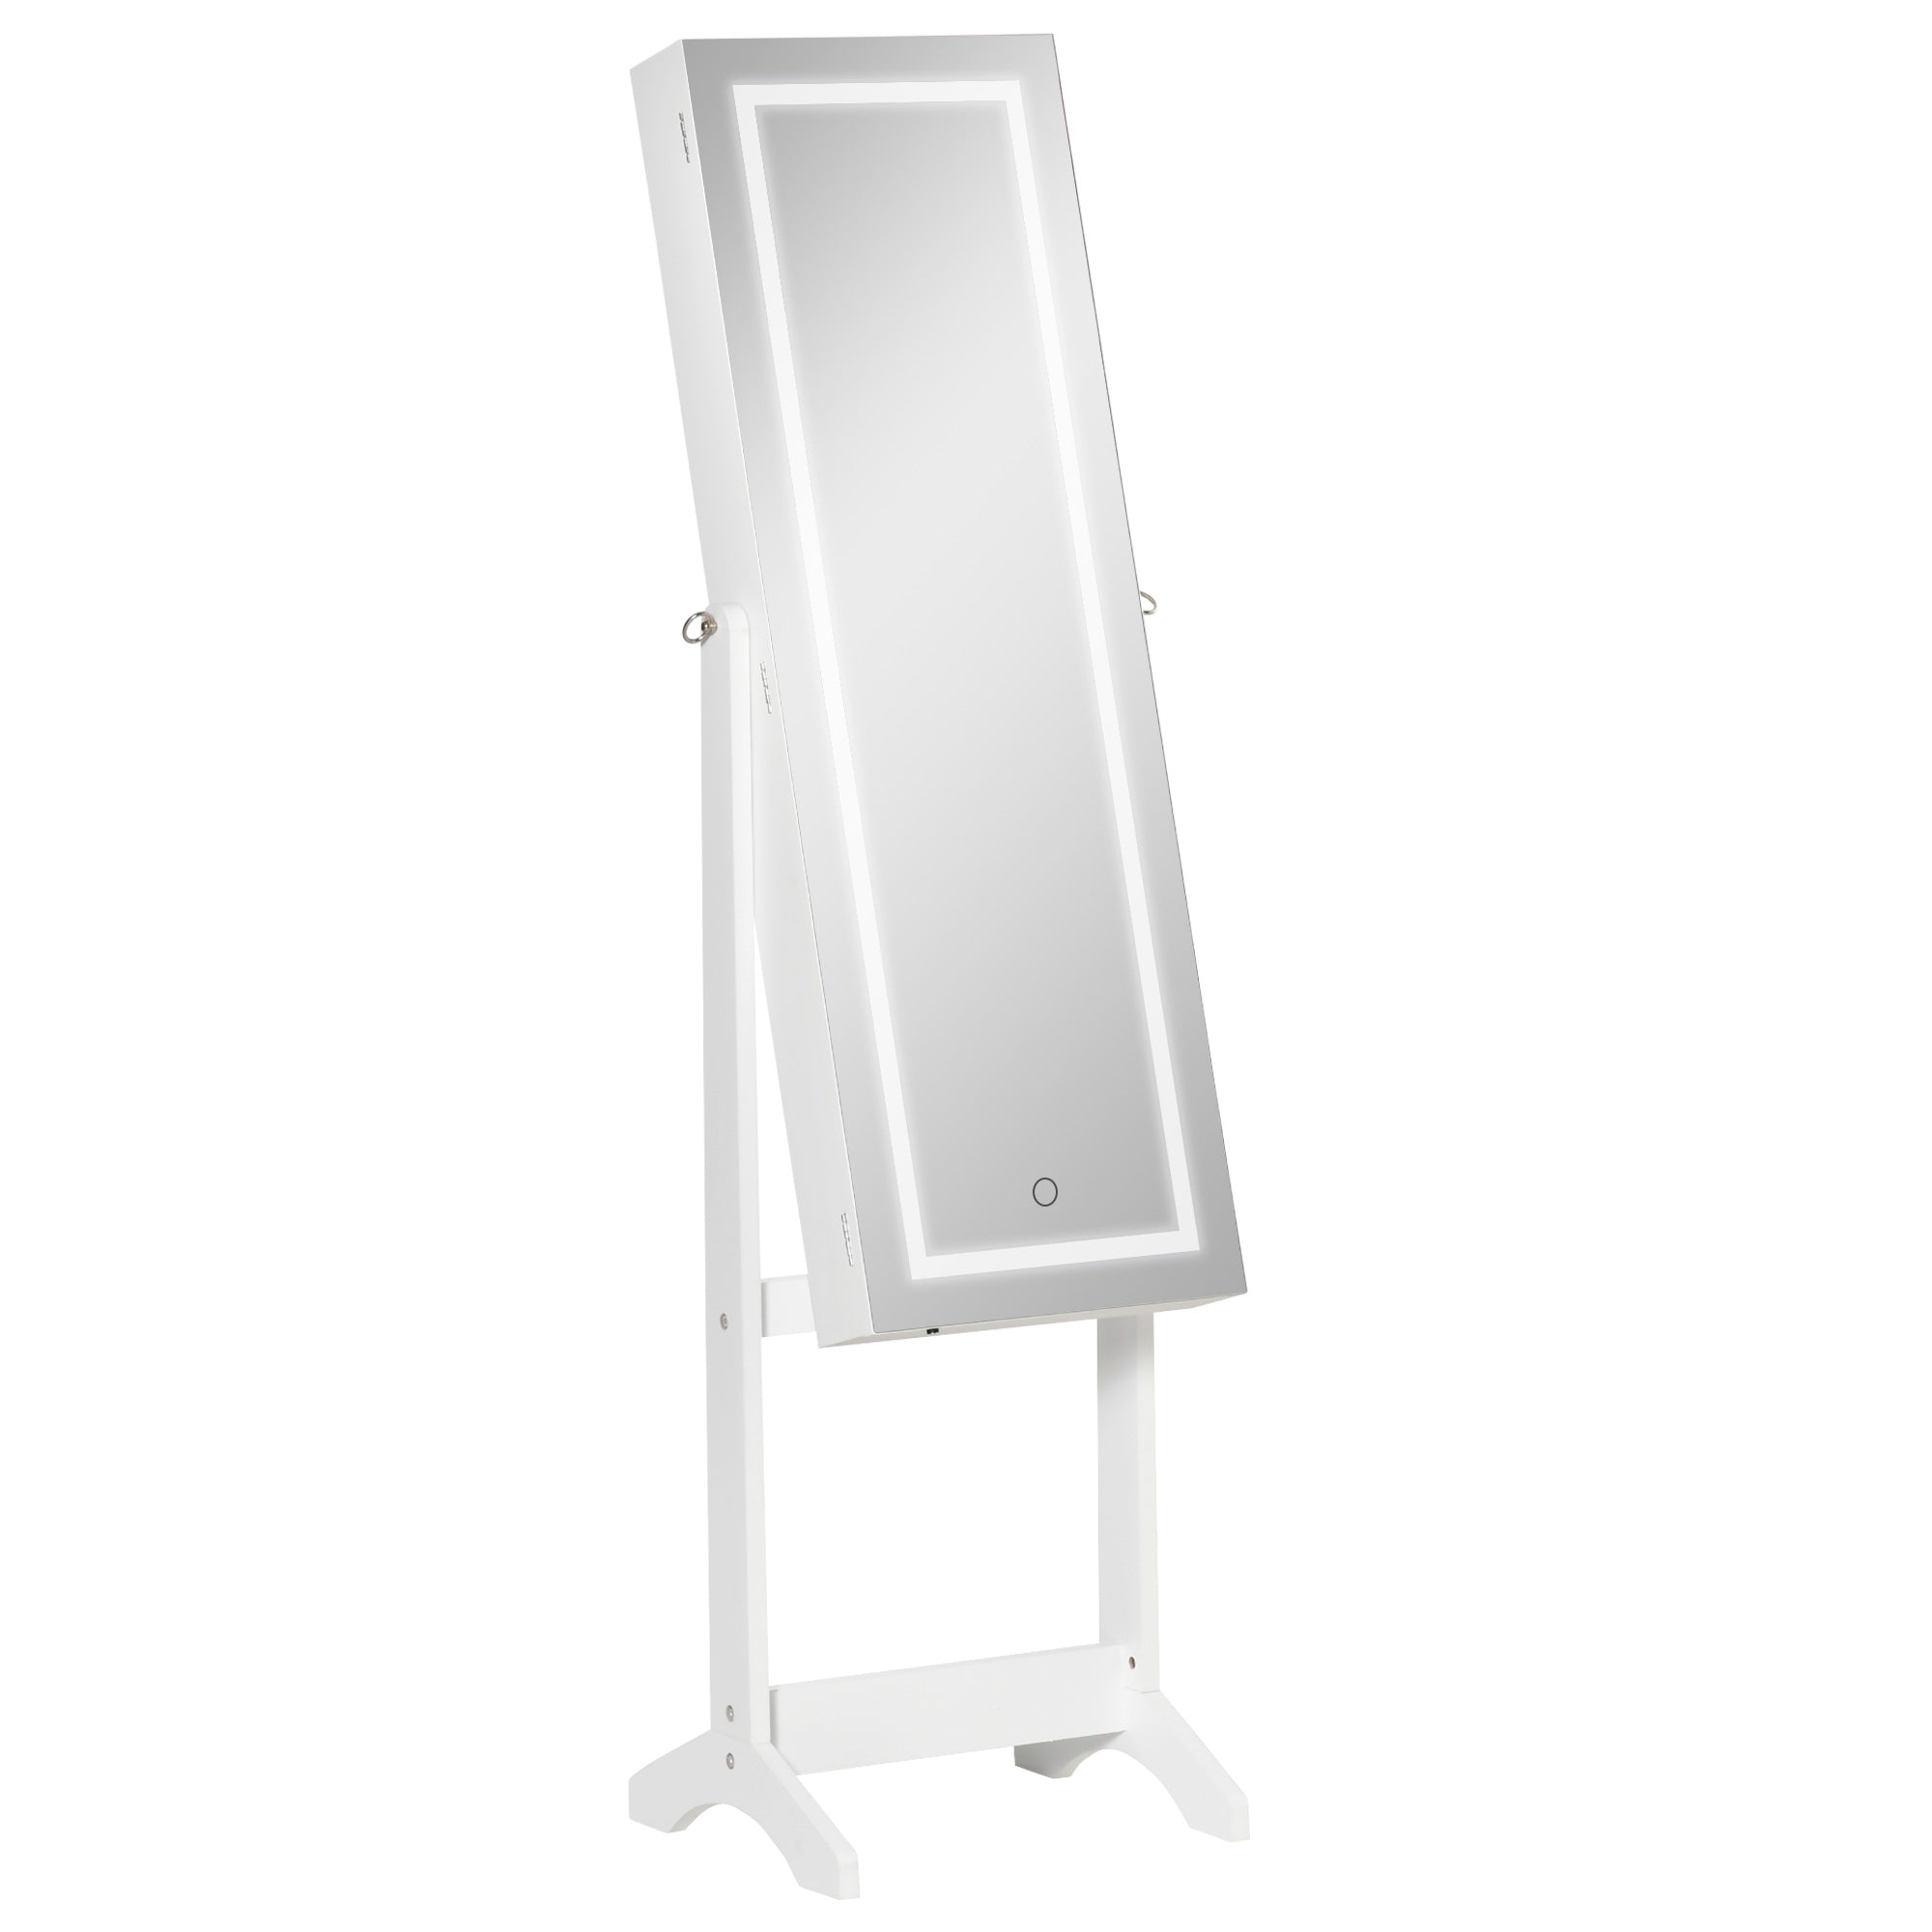 Jewellery Cabinet with LED Light, Lockable Jewellery Organiser with Full-Length Mirror for Bedroom Dressing Room, White-0